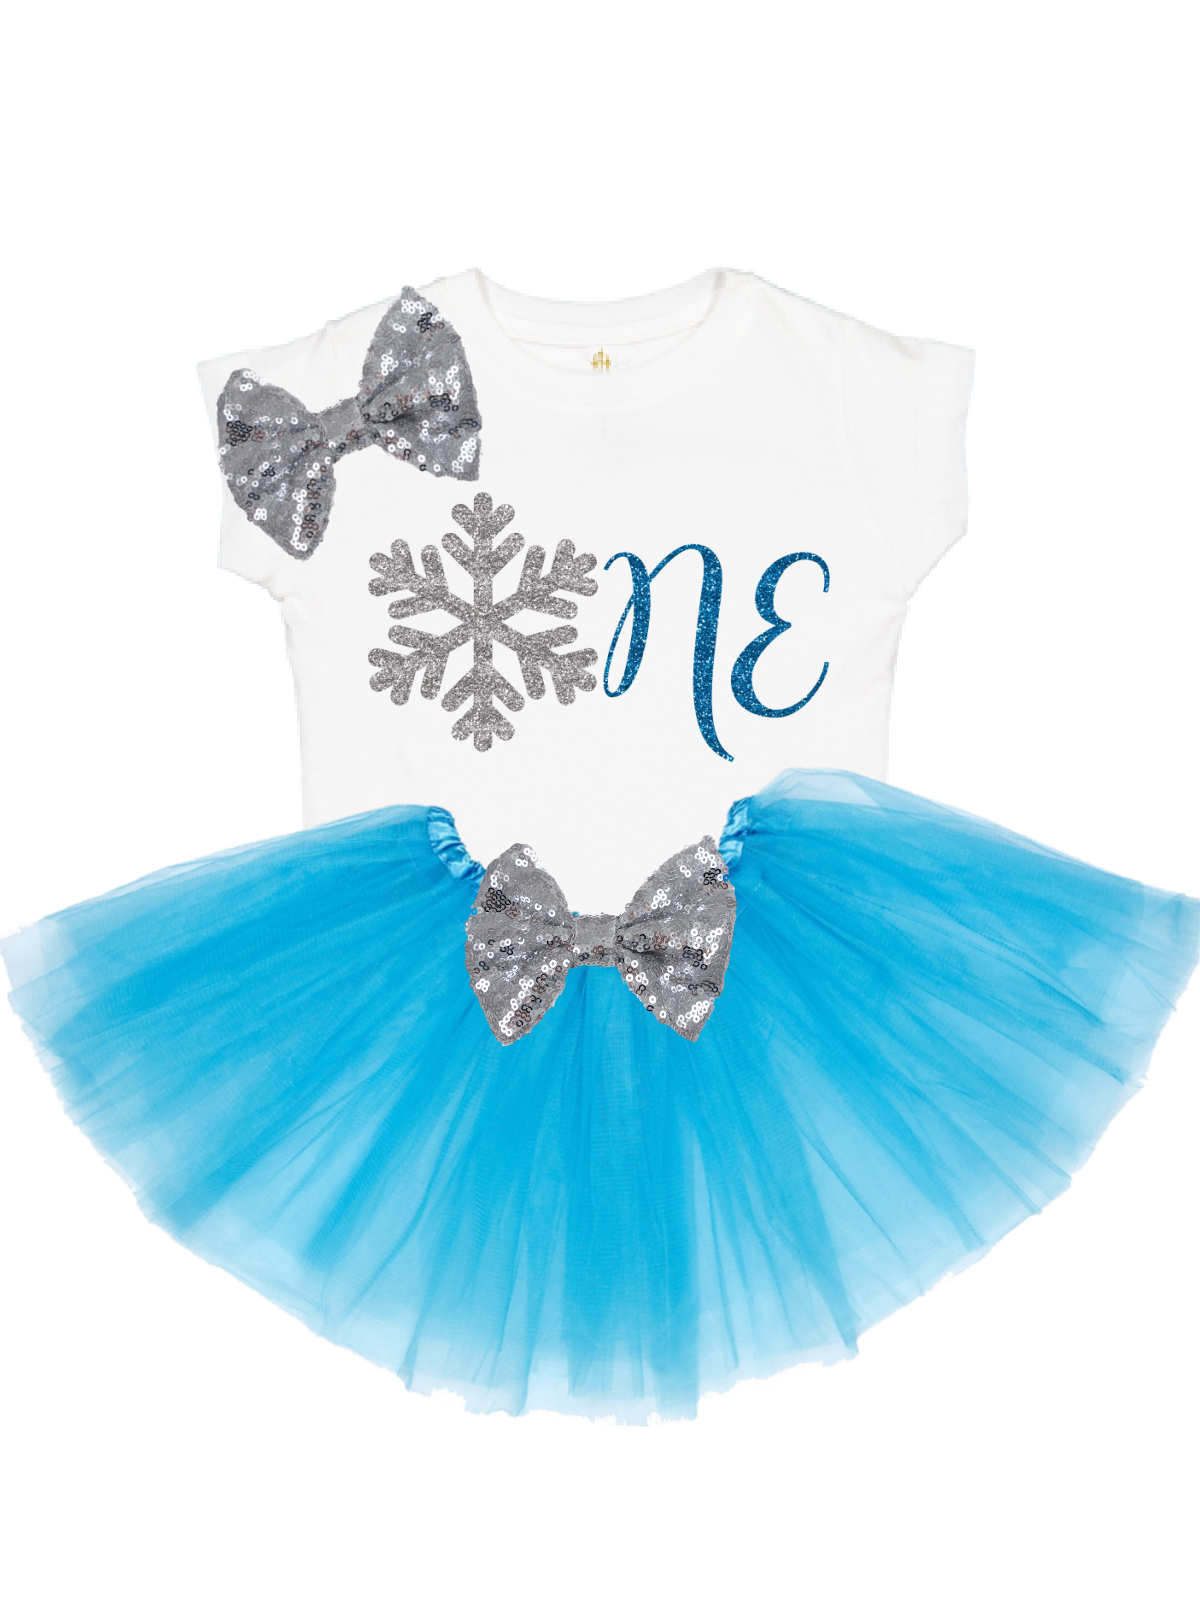 girls ONE birthday snowflake outfit